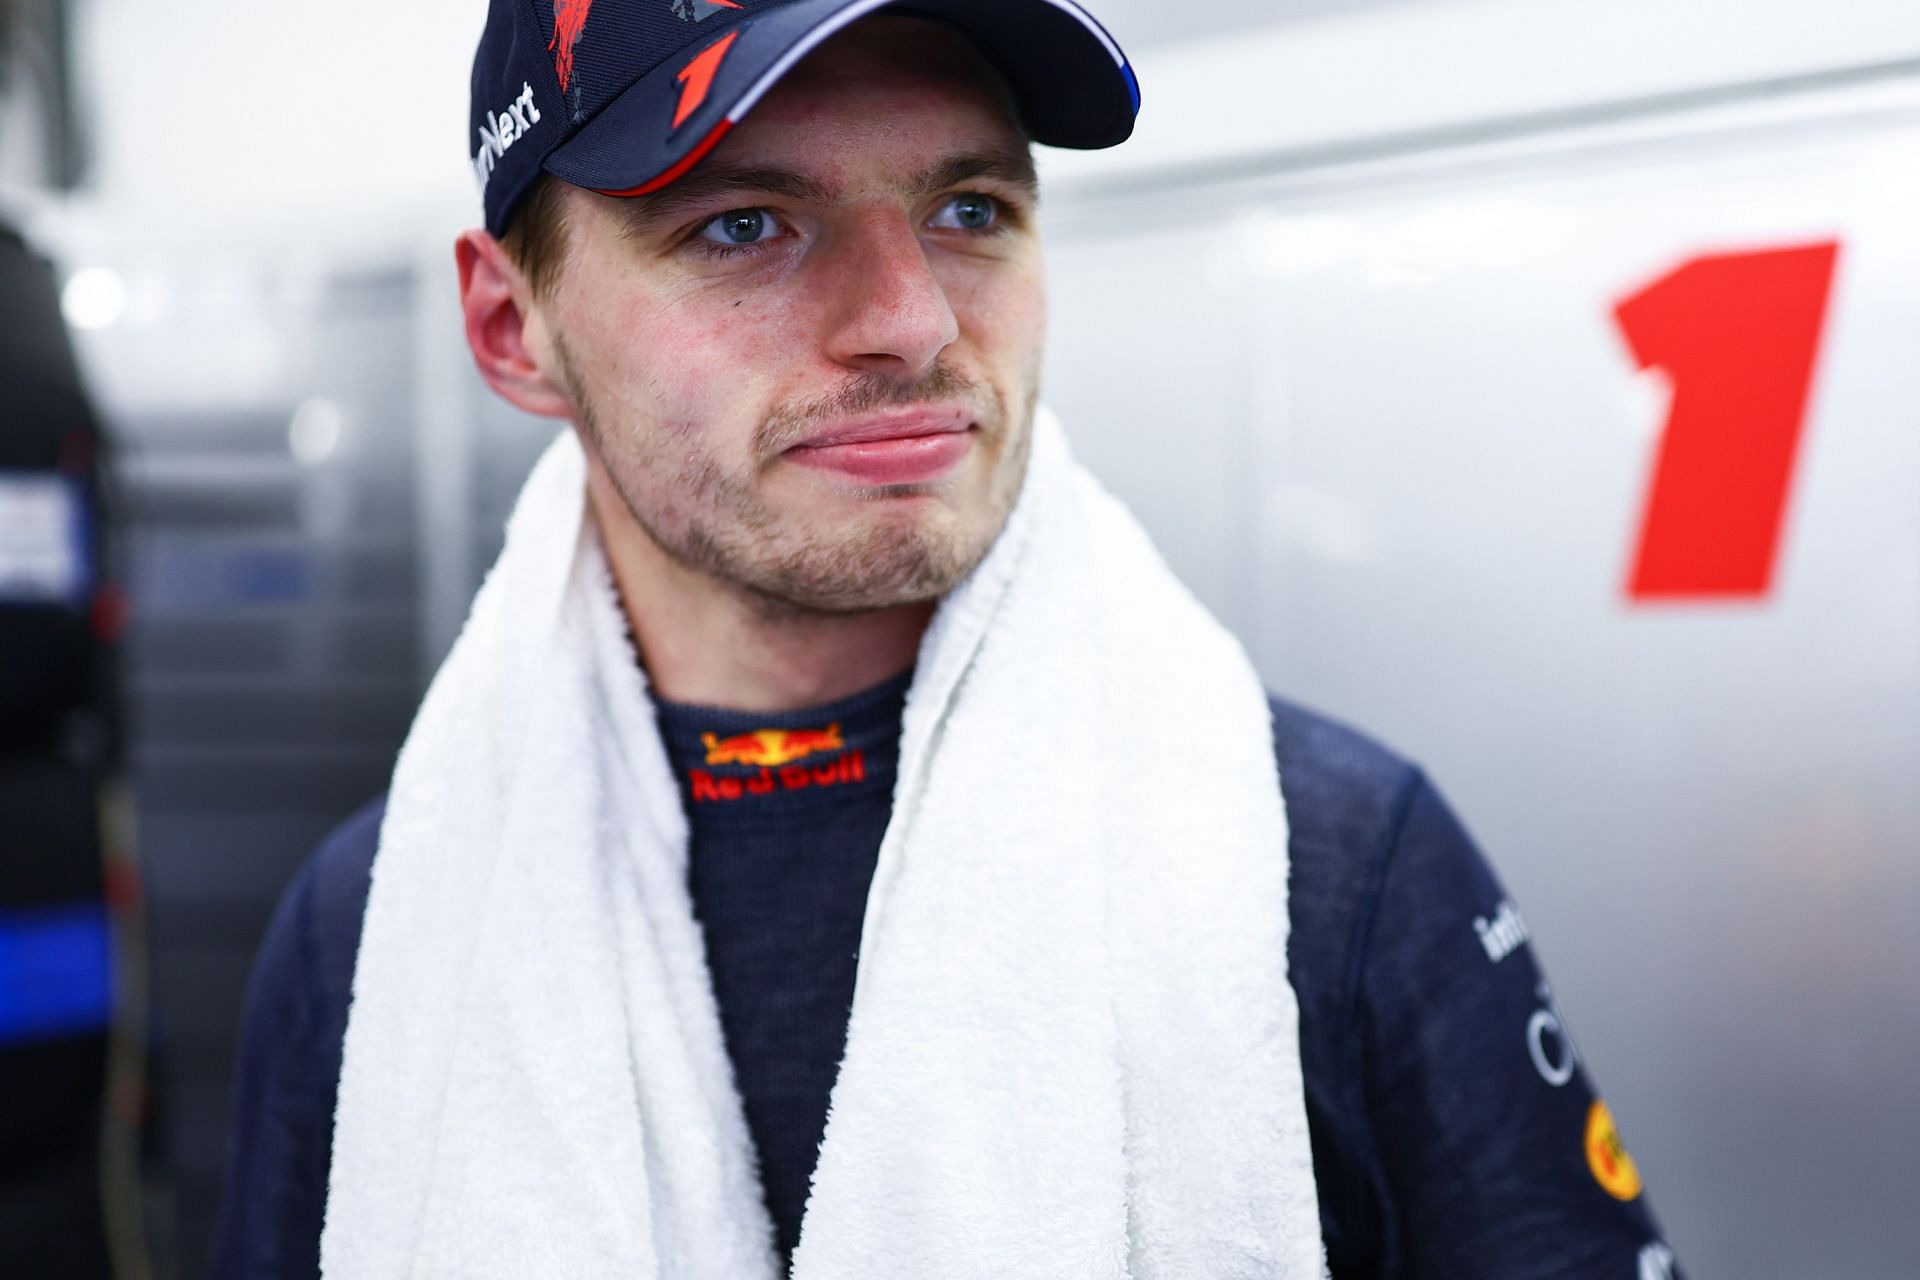 Max Verstappen at the F1 Grand Prix of Hungary - Practice